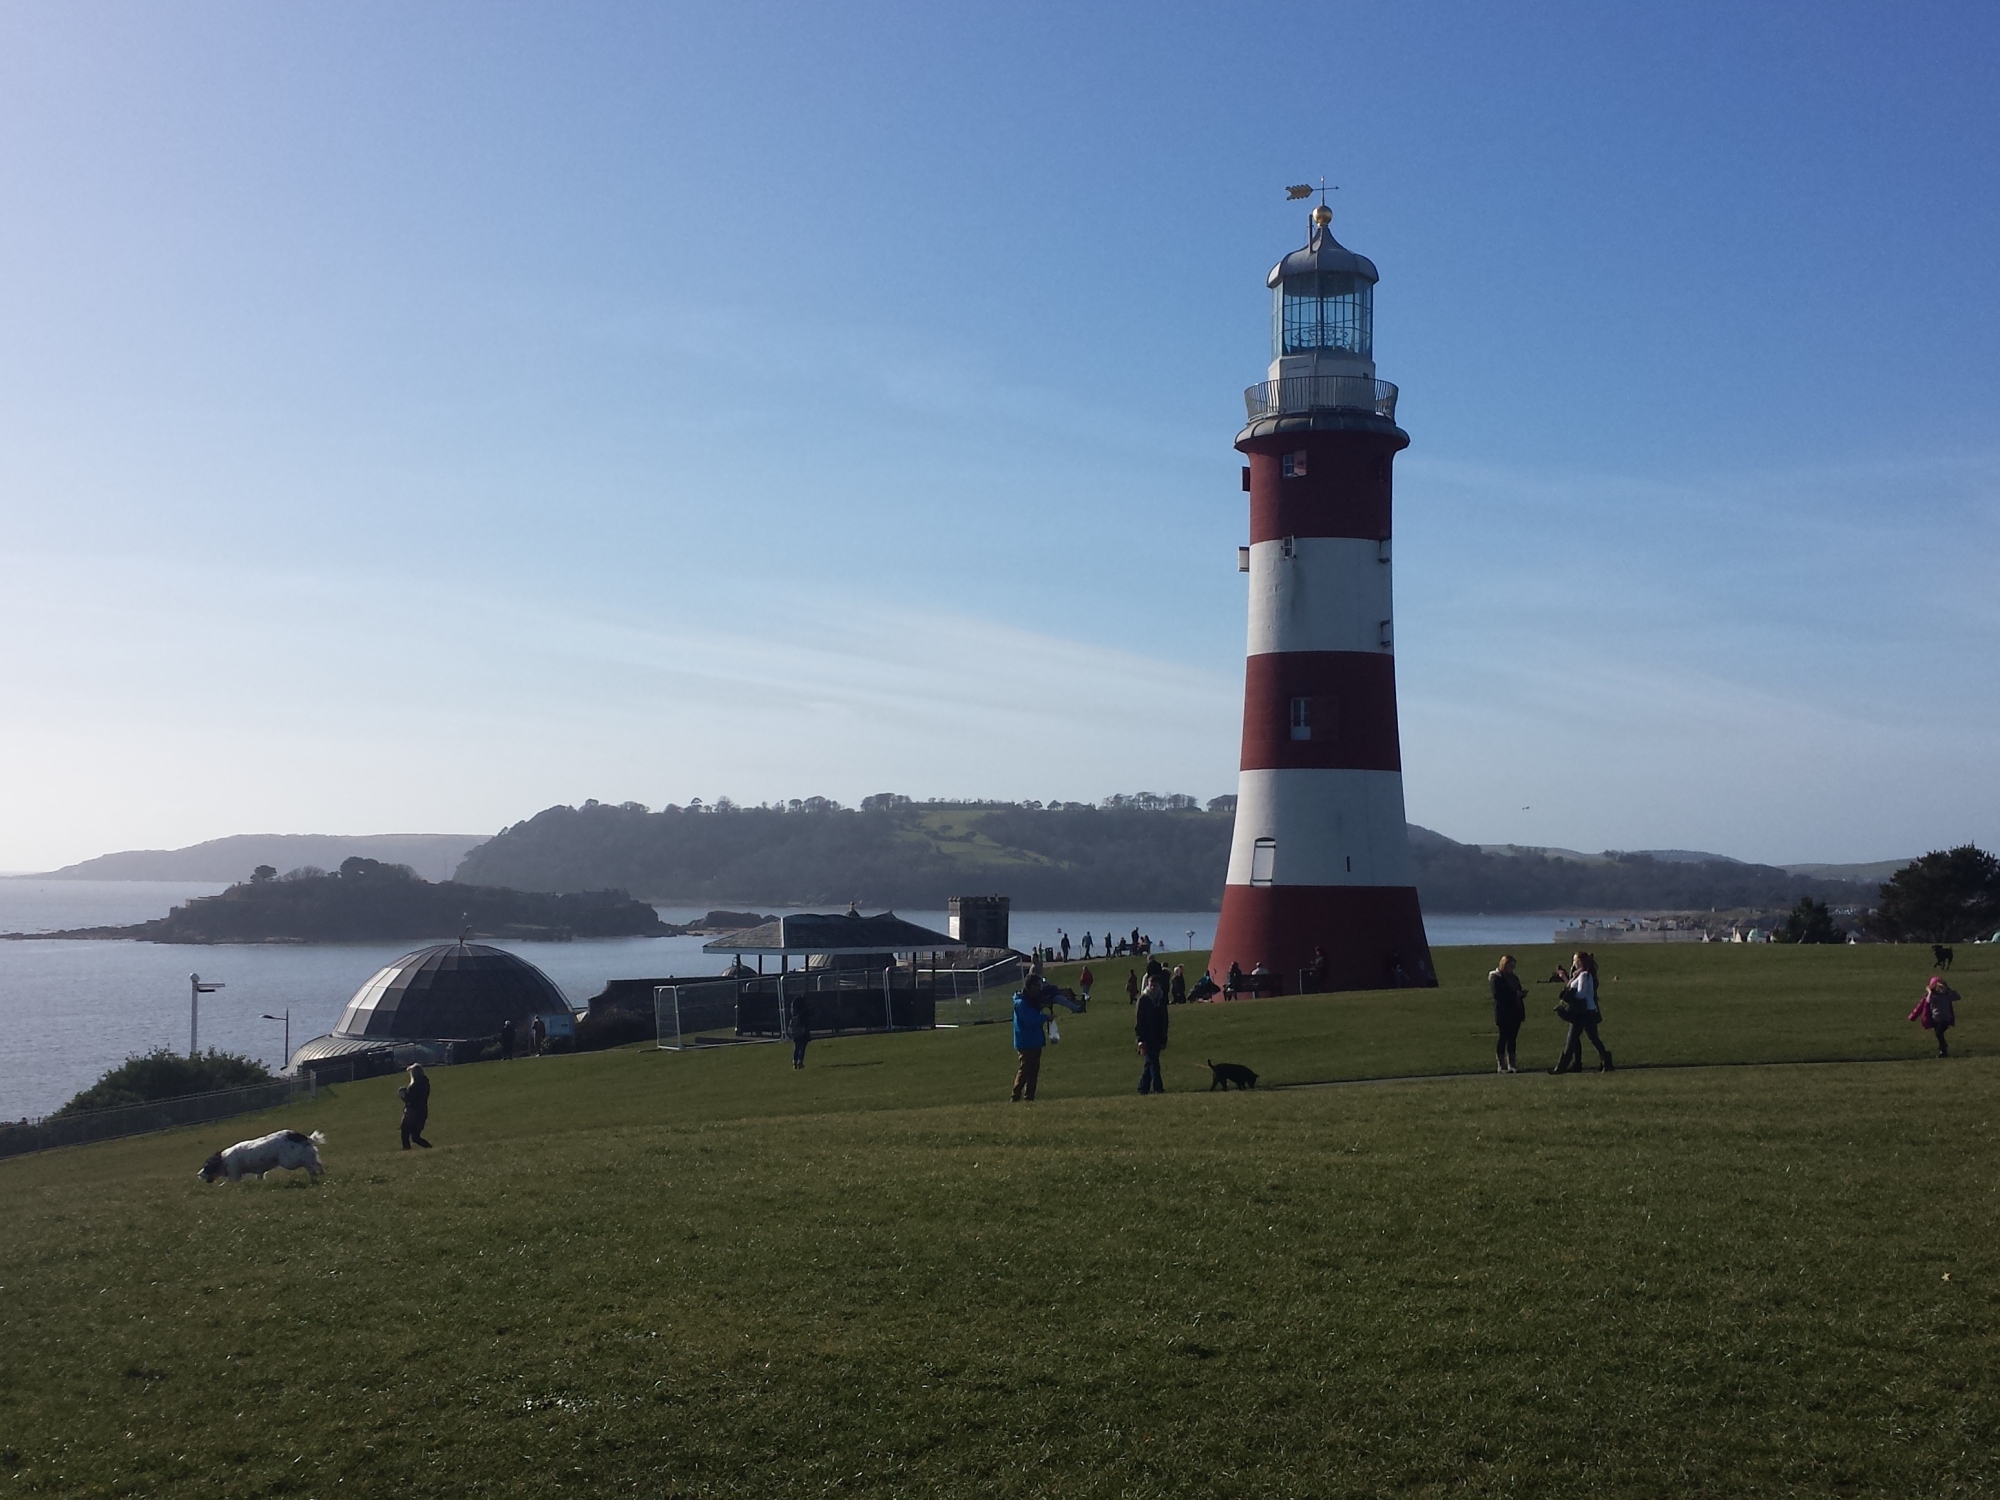 Plymouth, Devon, Plymouth Hoe, Smeaton's Tower, The Dome